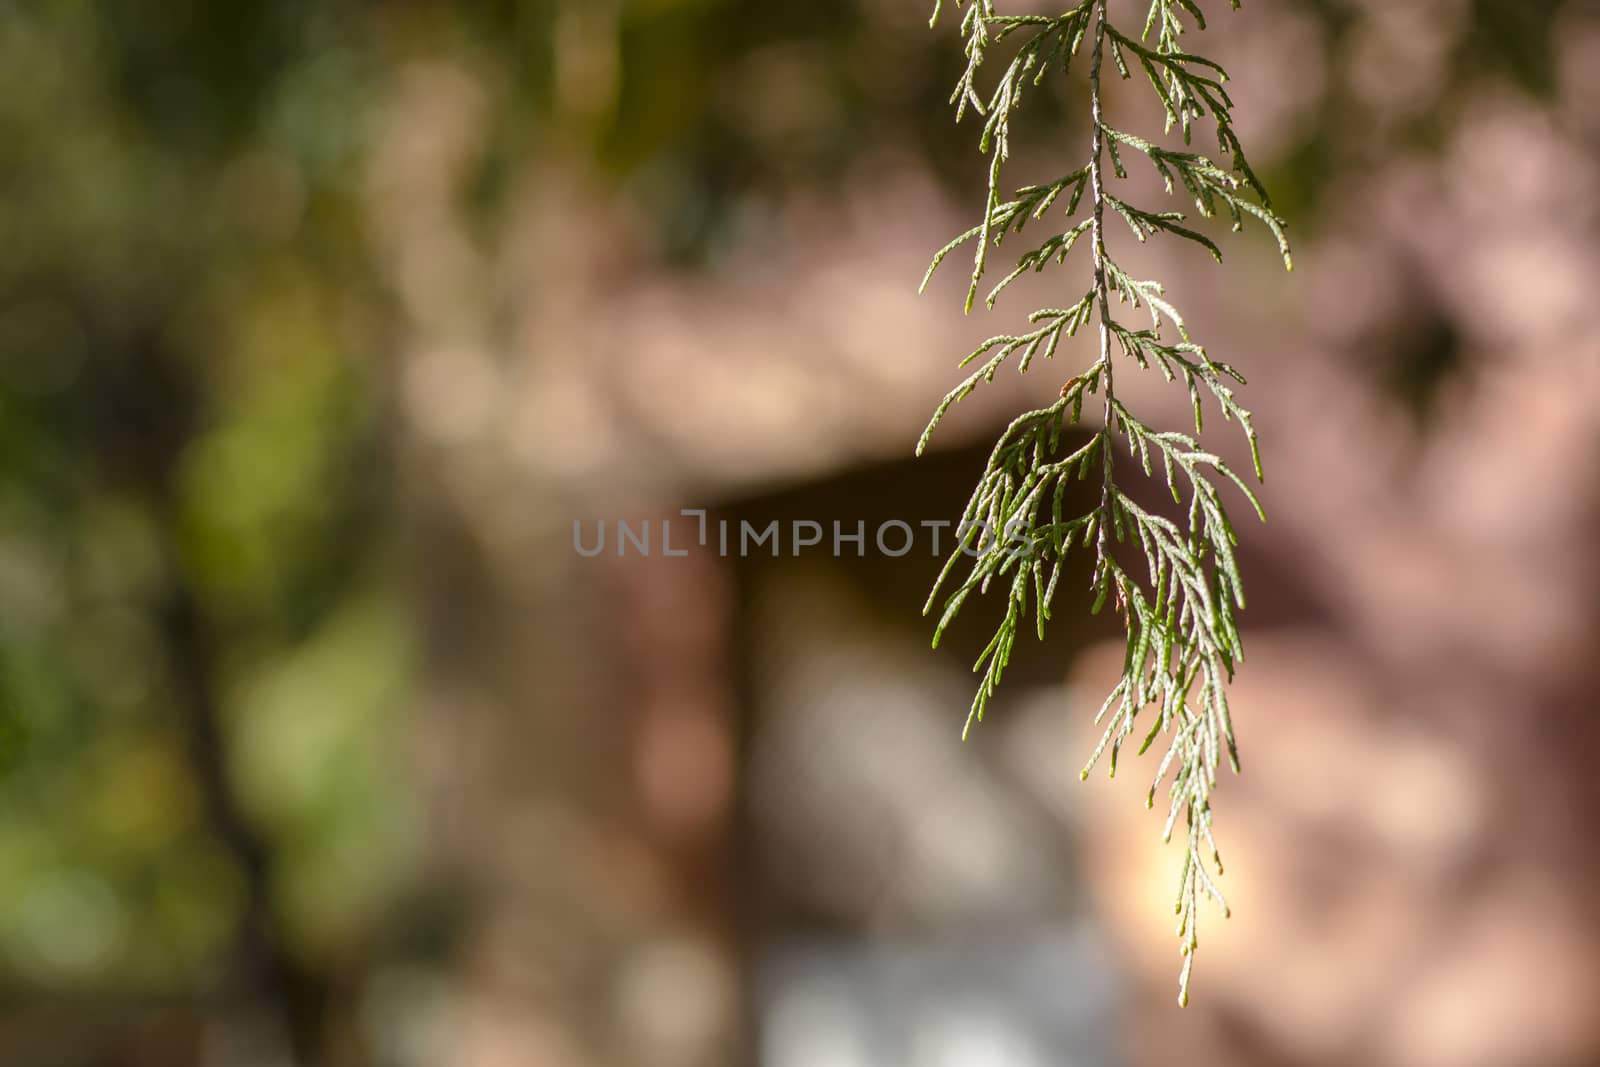 pine tree leaves and branch in the forest at sunlight, close-up and macro by Taidundua